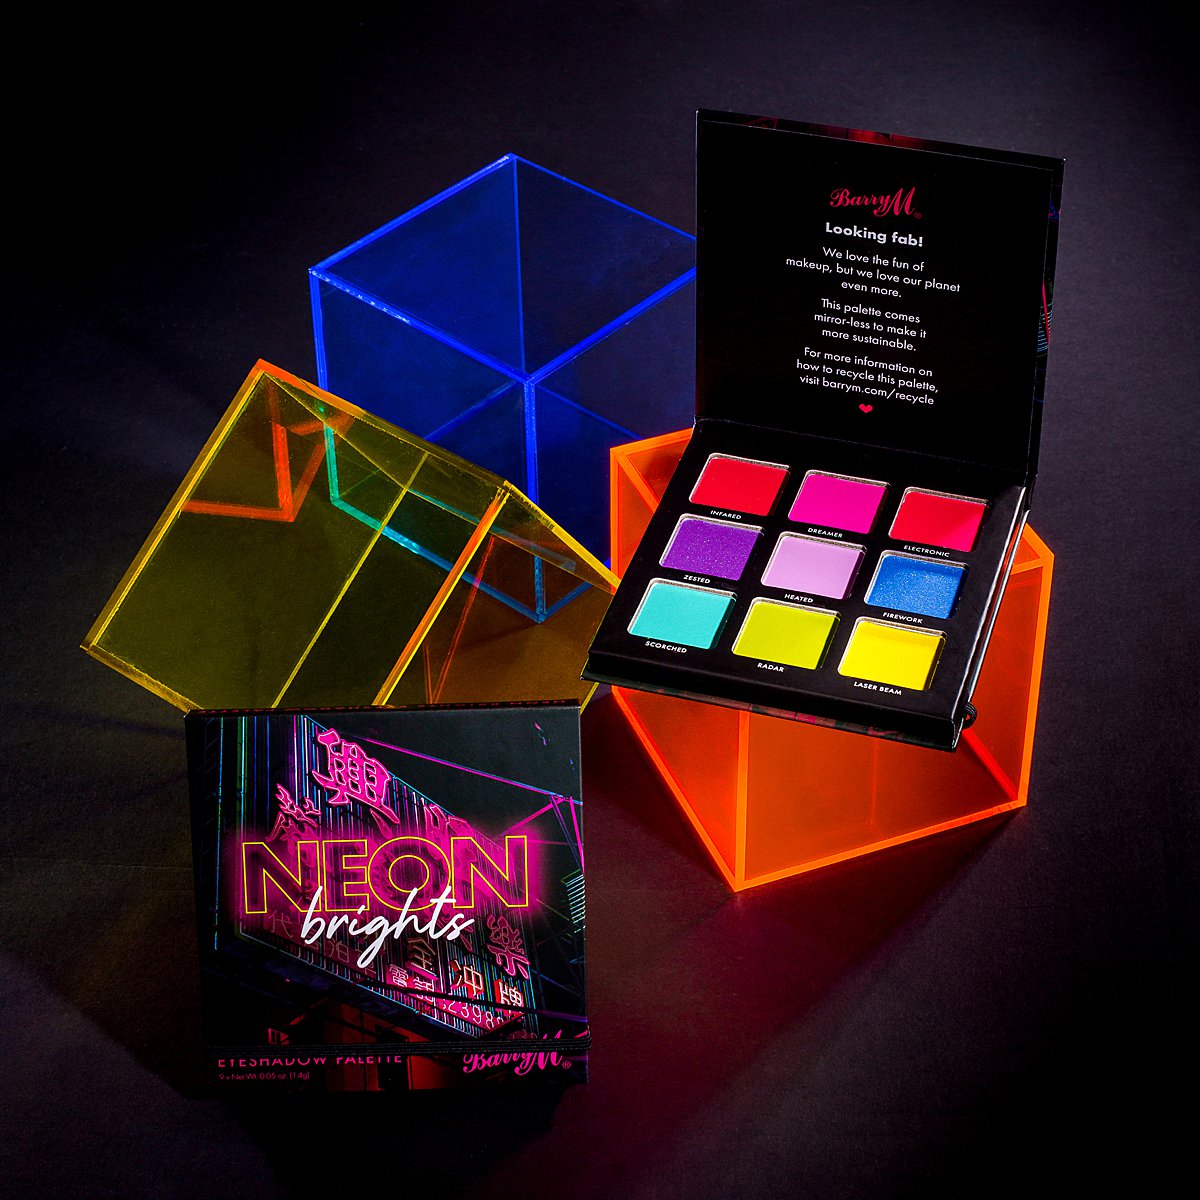 Colour-filled beauty product content creation for Barry M cosmetics. Styled makeup product stills photography by Marianne Taylor.